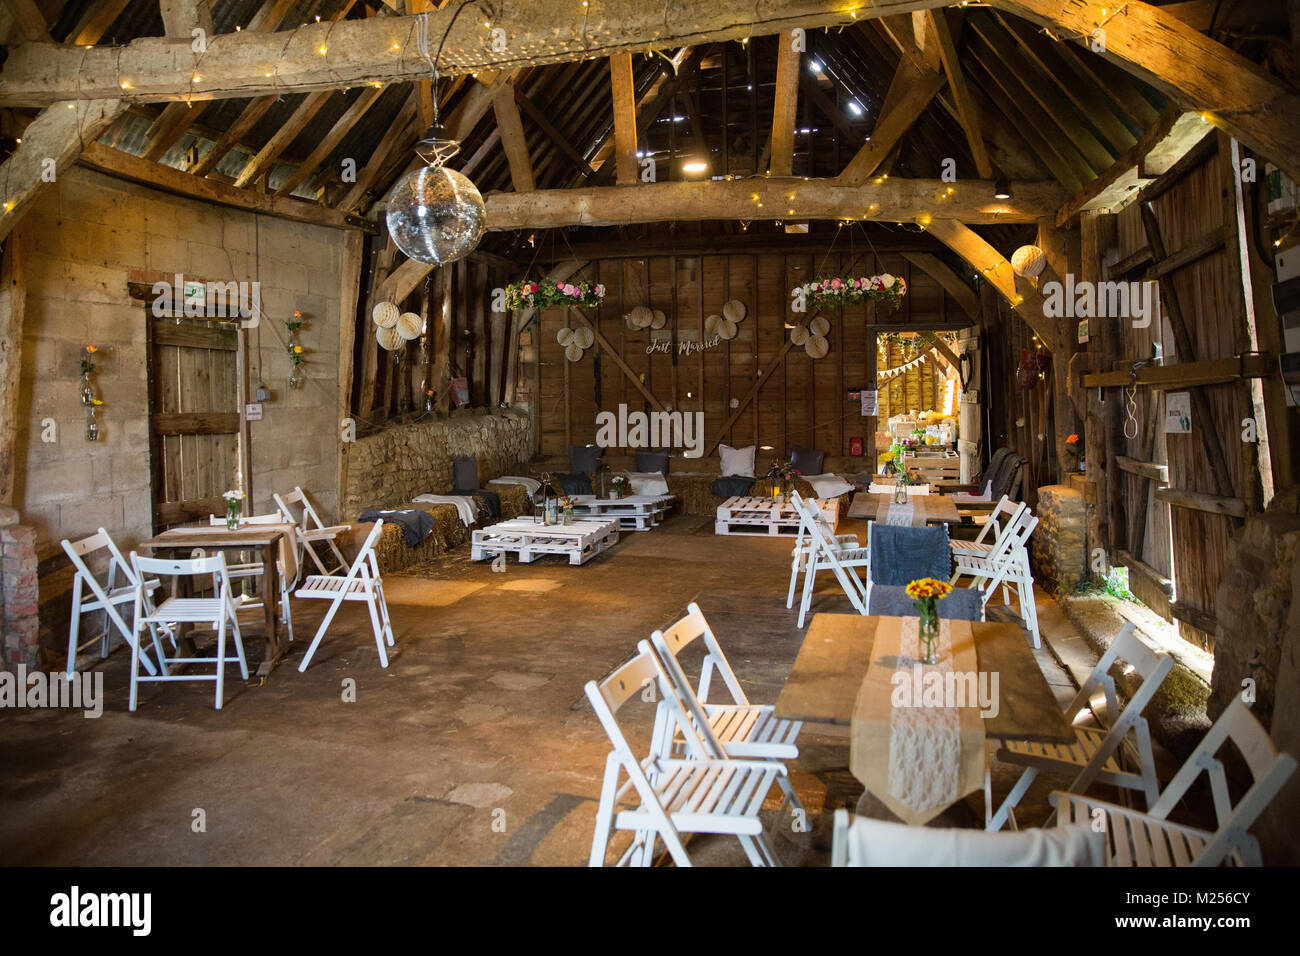 Barn decorated for special occasion with glitter ball, string lights, tables and chairs Stock Photo